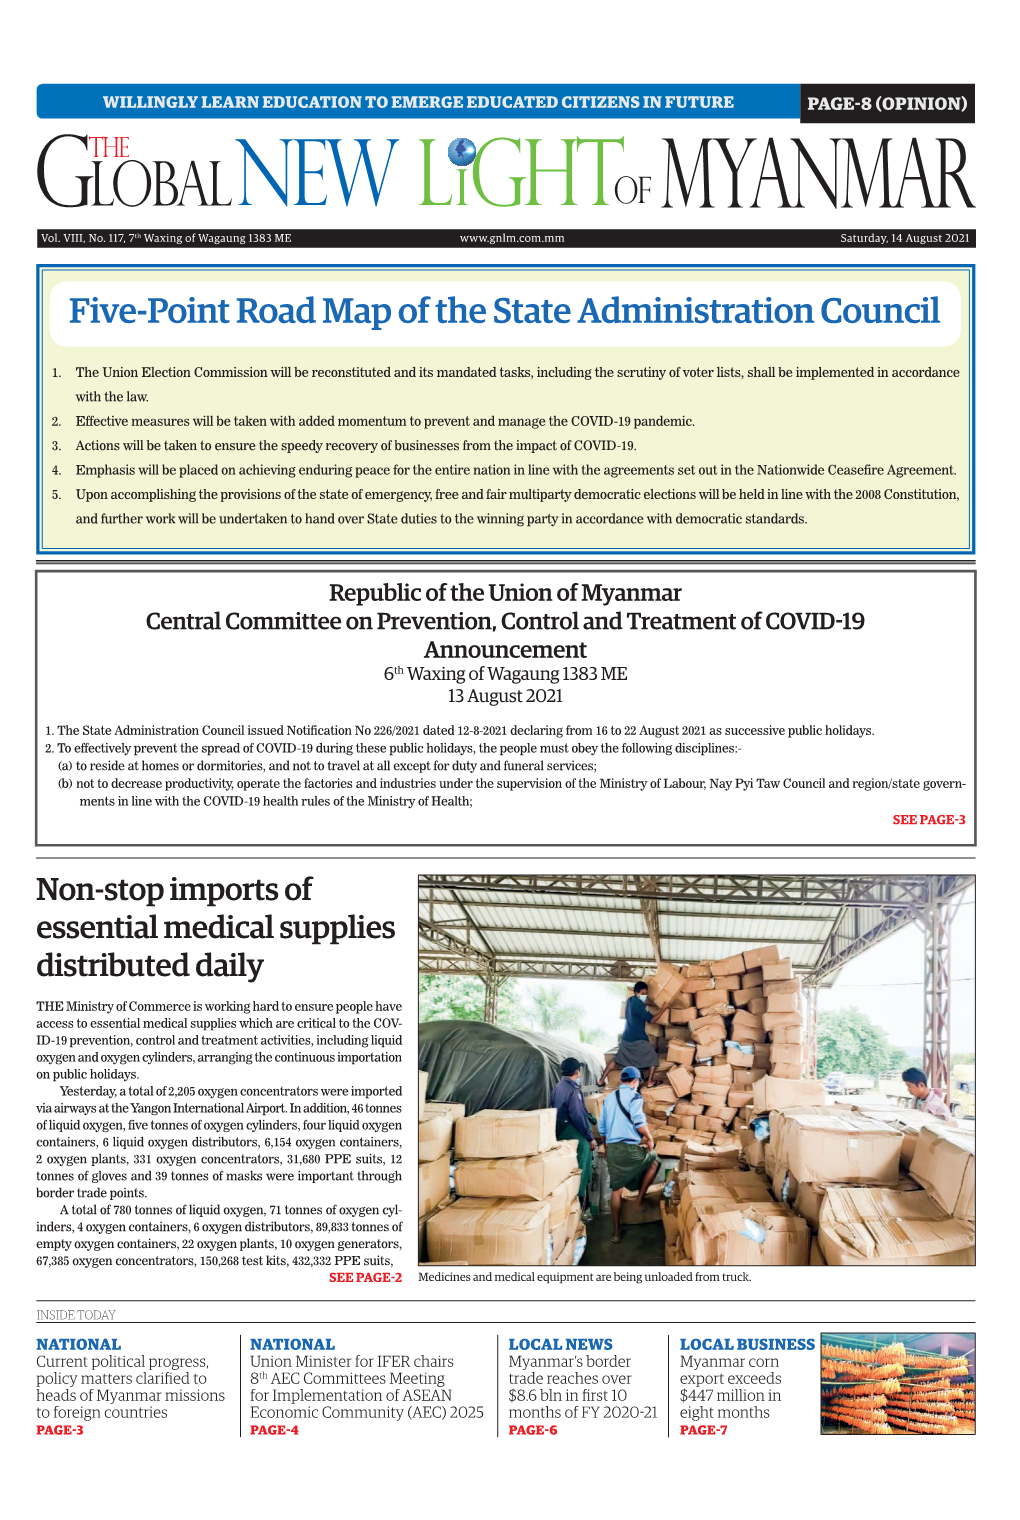 Five-Point Road Map of the State Administration Council